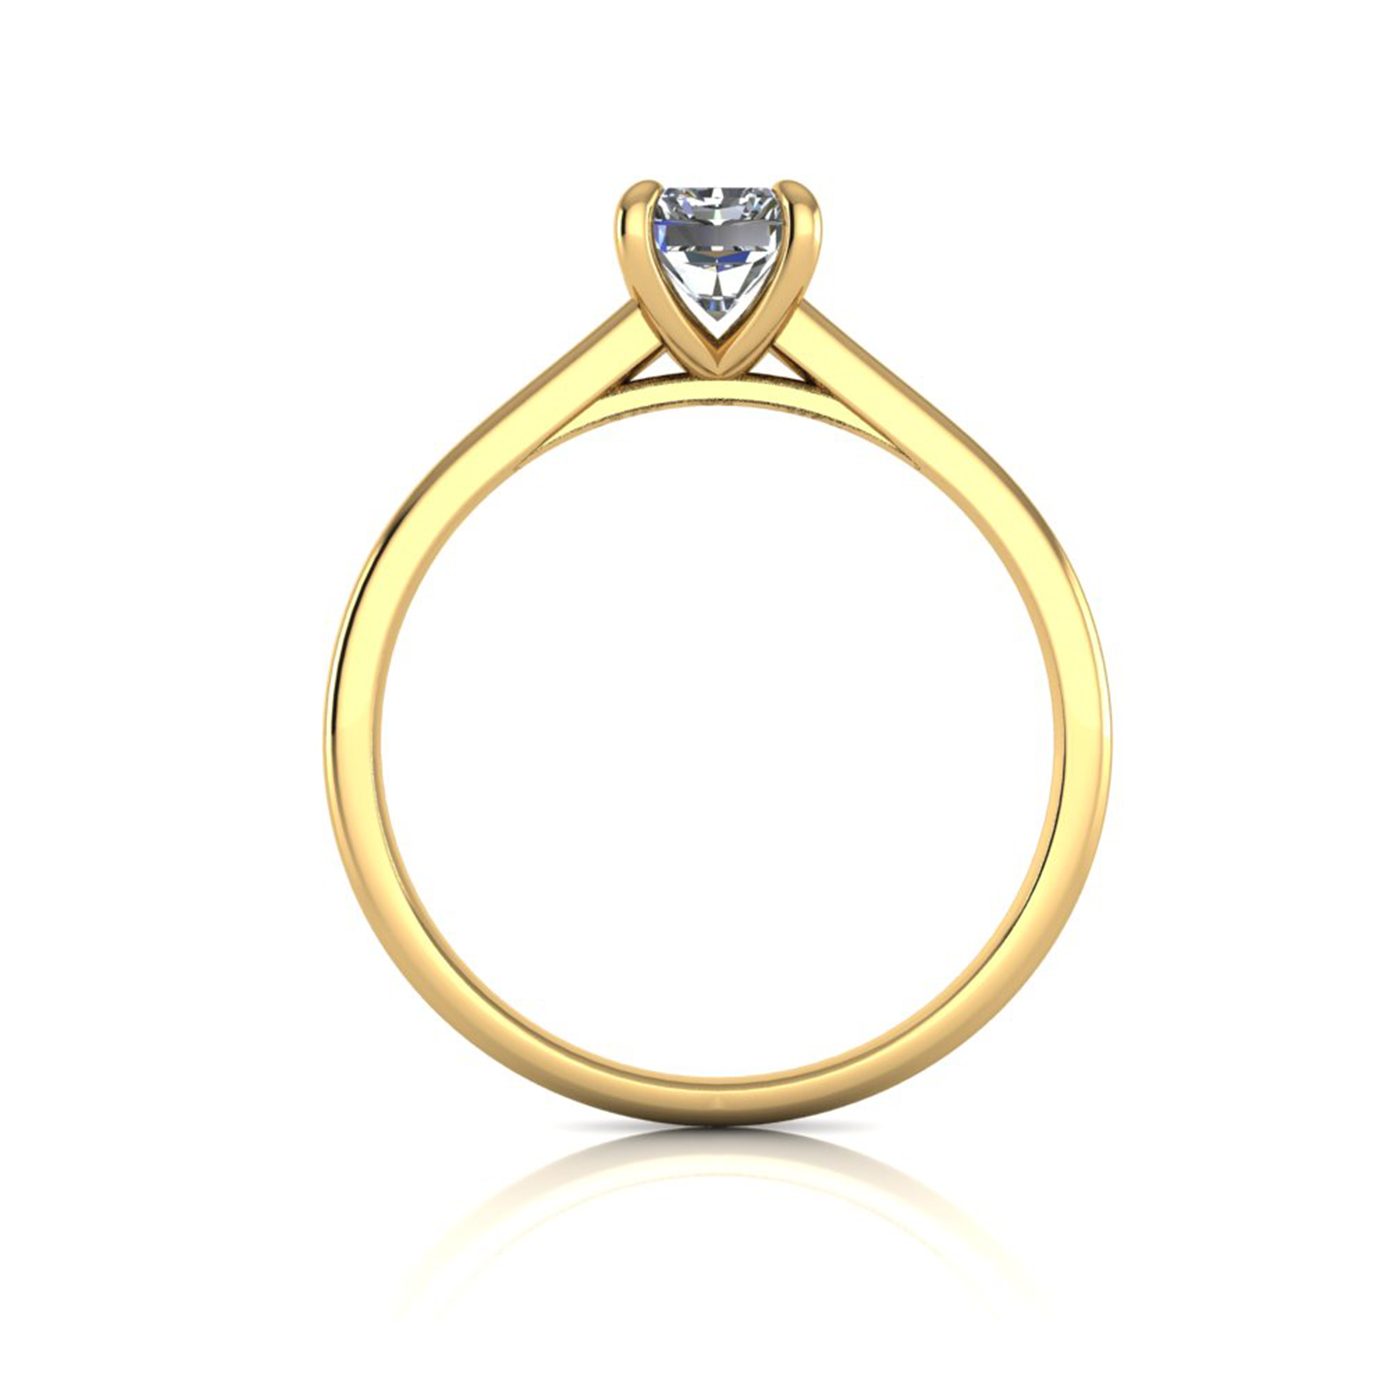 18k yellow gold  0,80 ct 4 prongs solitaire radiant cut diamond engagement ring with whisper thin band